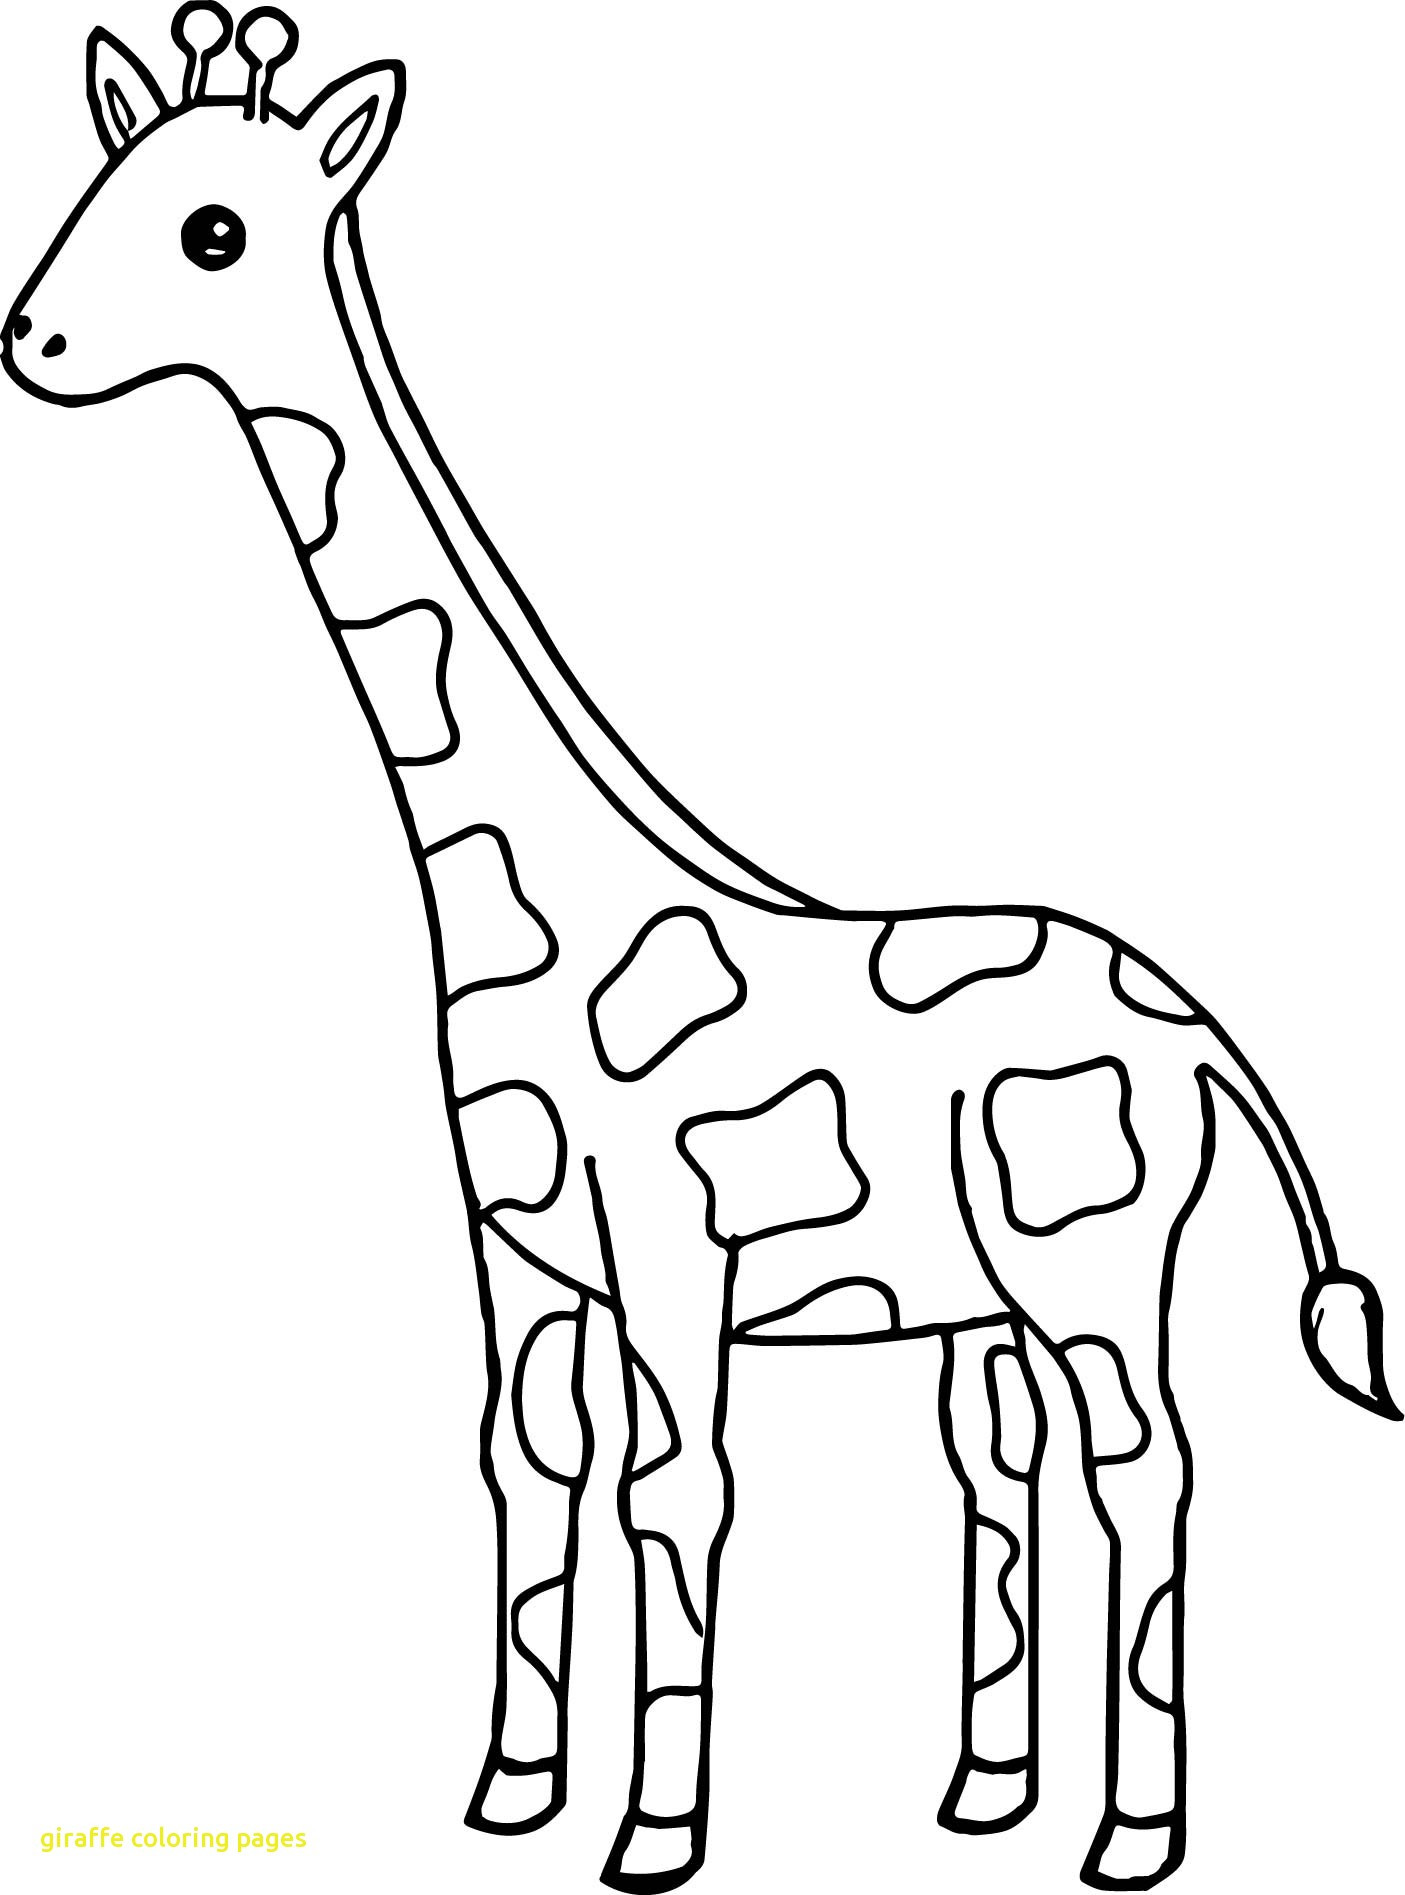 Giraffe Mask Coloring Page - G is for Giraffe coloring page - coloring